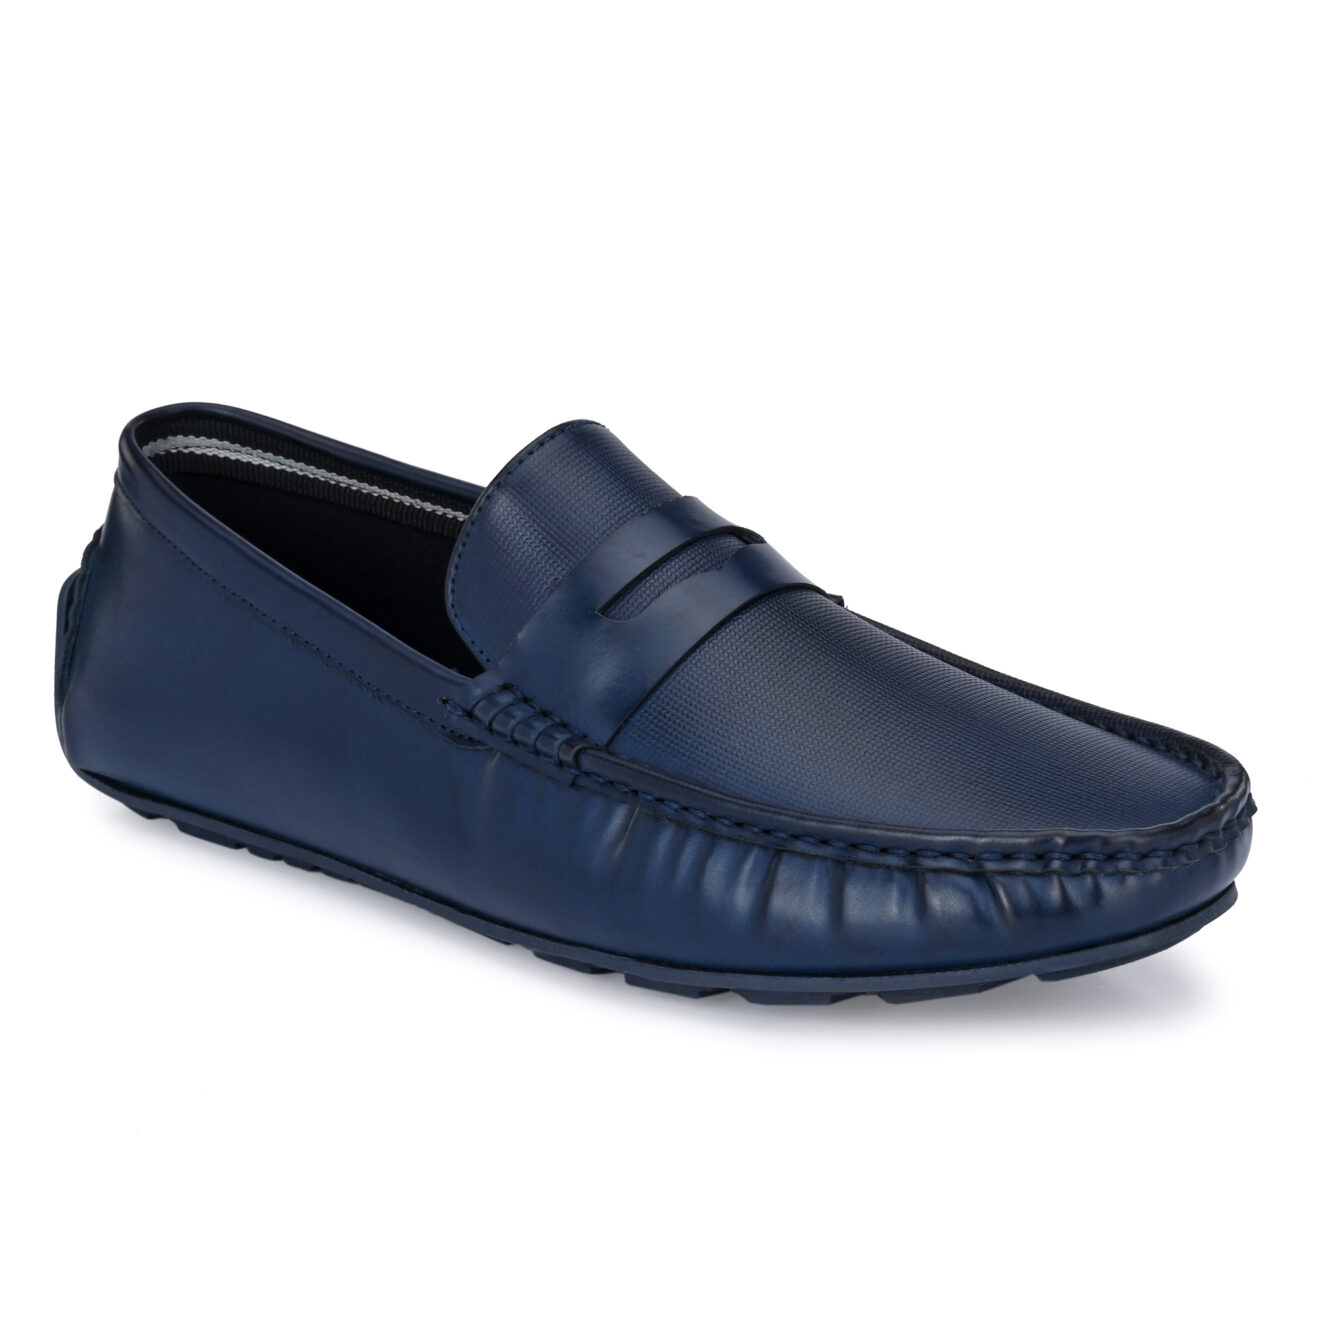 Buskins Men’s Classic Casual Loafer -BA3715 - Buskins India